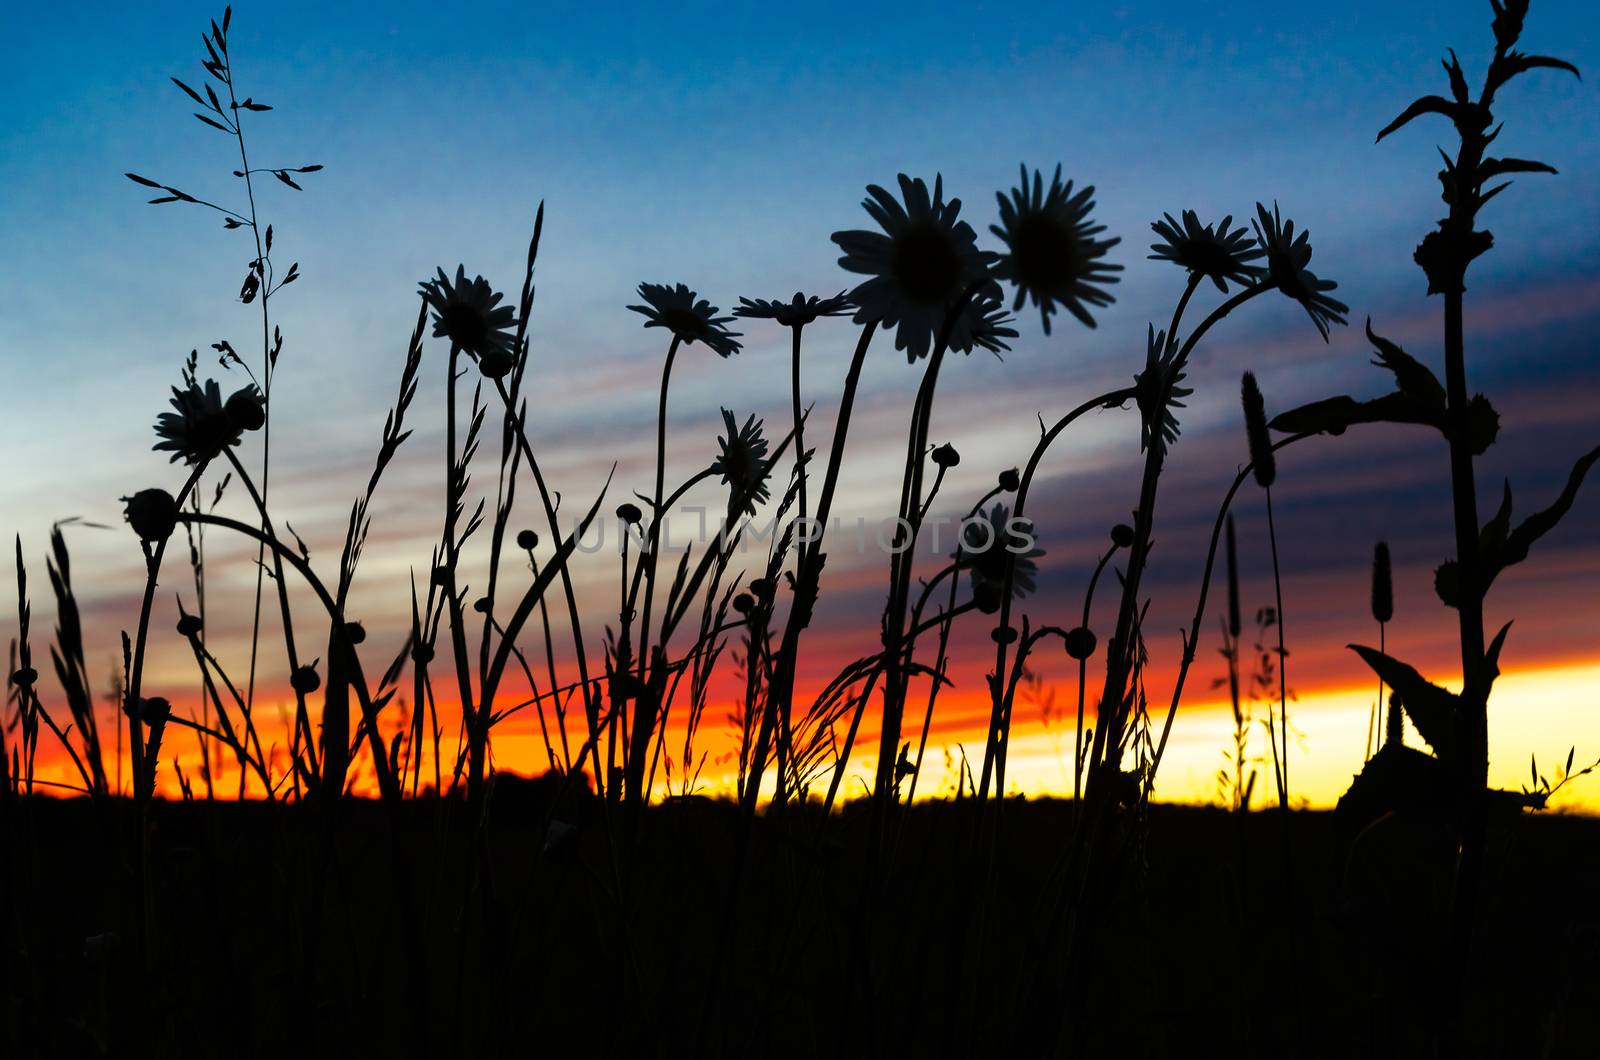 Silhouette of wildflowers at sunset by ganchar